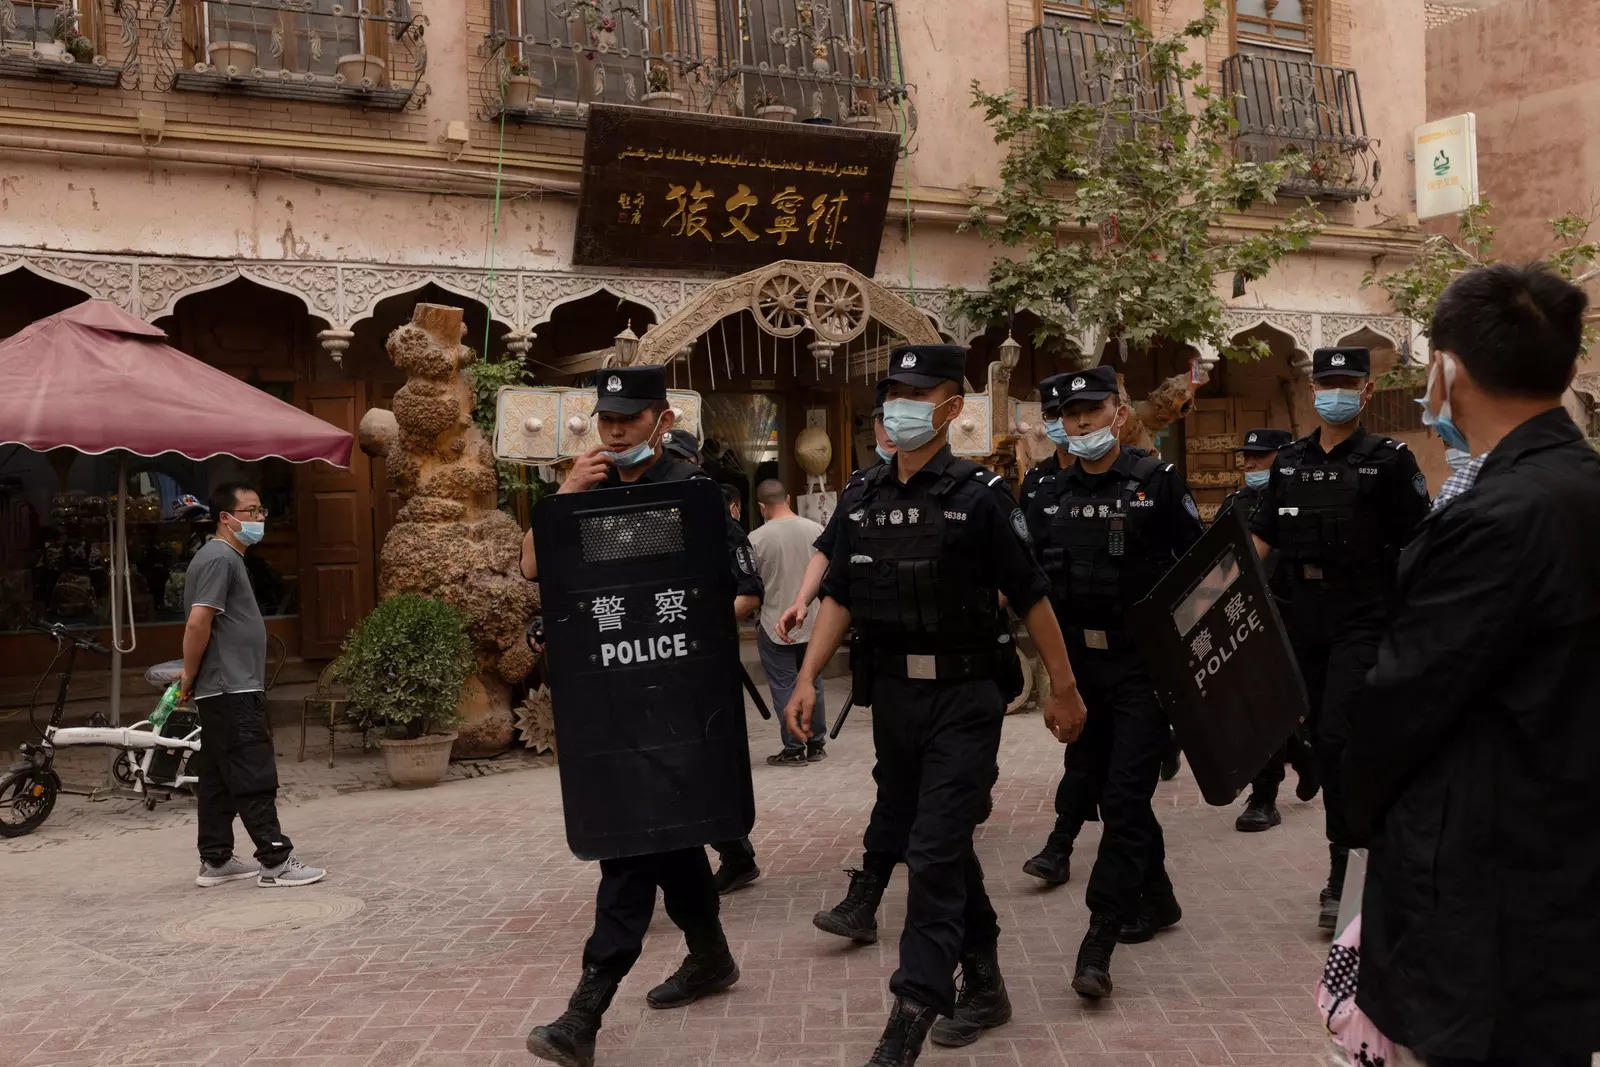  Police officers patrol in the old city in Kashgar, Xinjiang Uyghur Autonomous Region, China,  